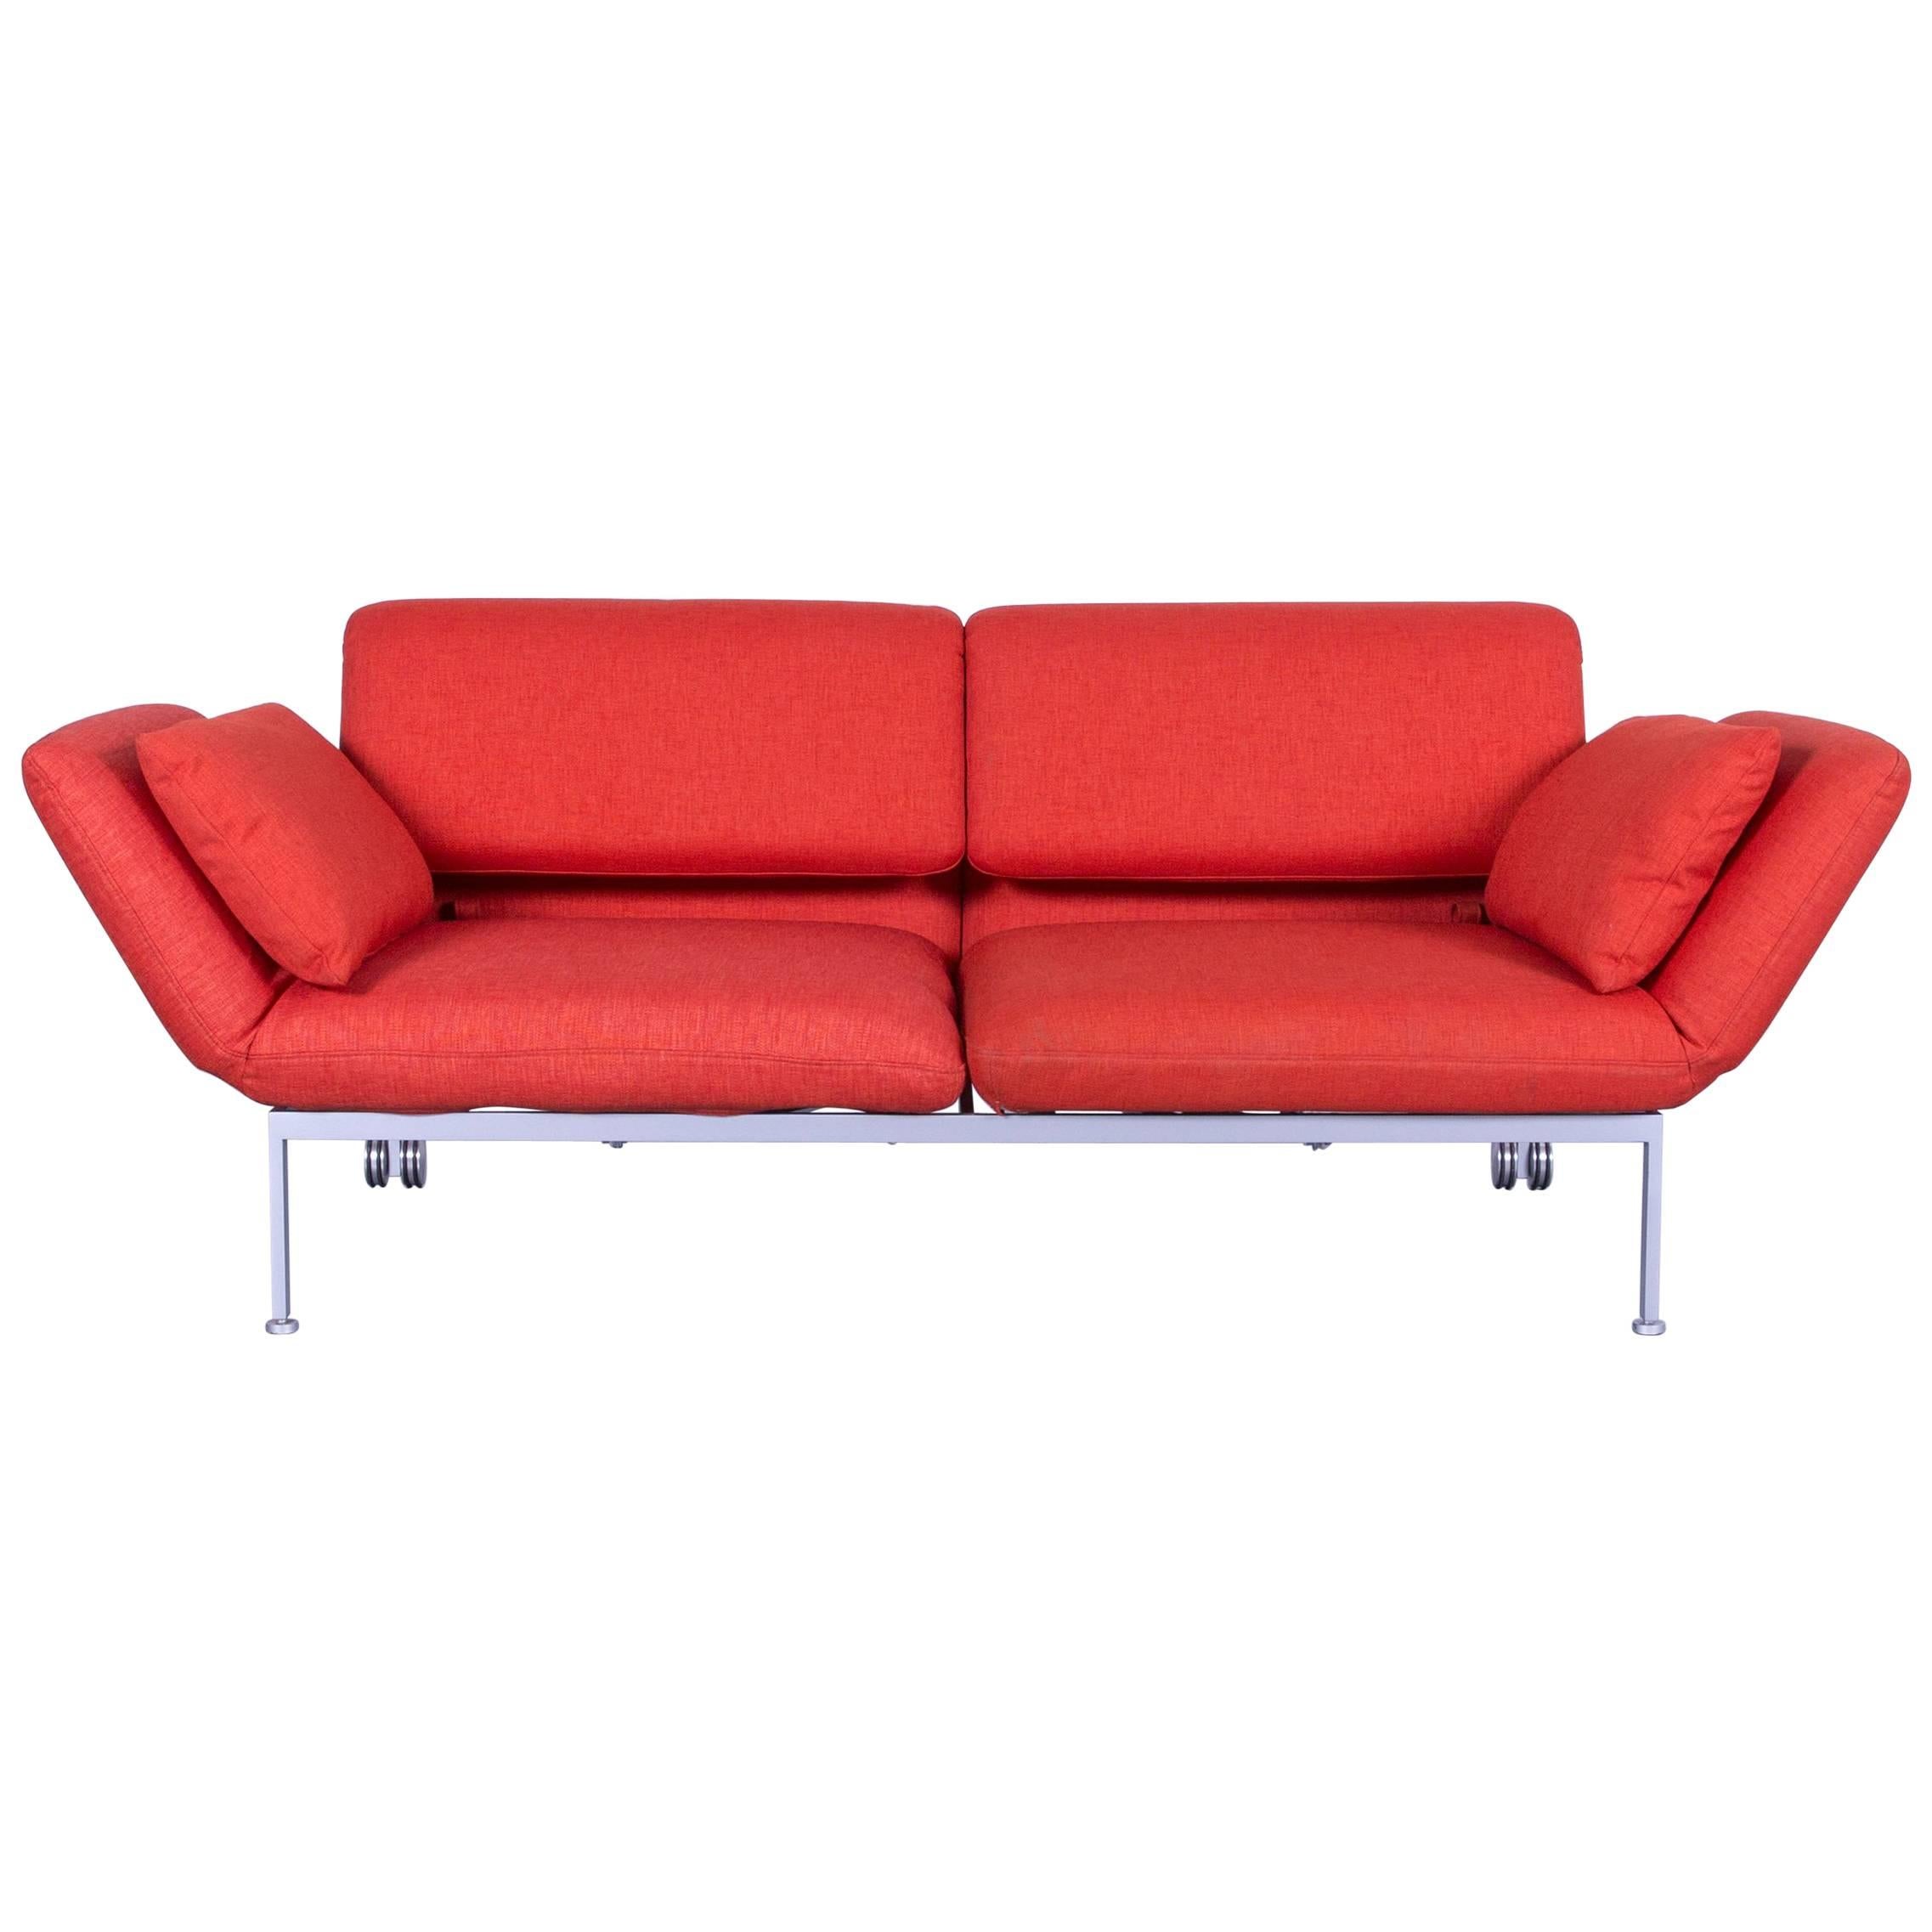 Brühl & Sippold Roro Designer Bed Sofa in Red Orange Fabric with Great Functions For Sale